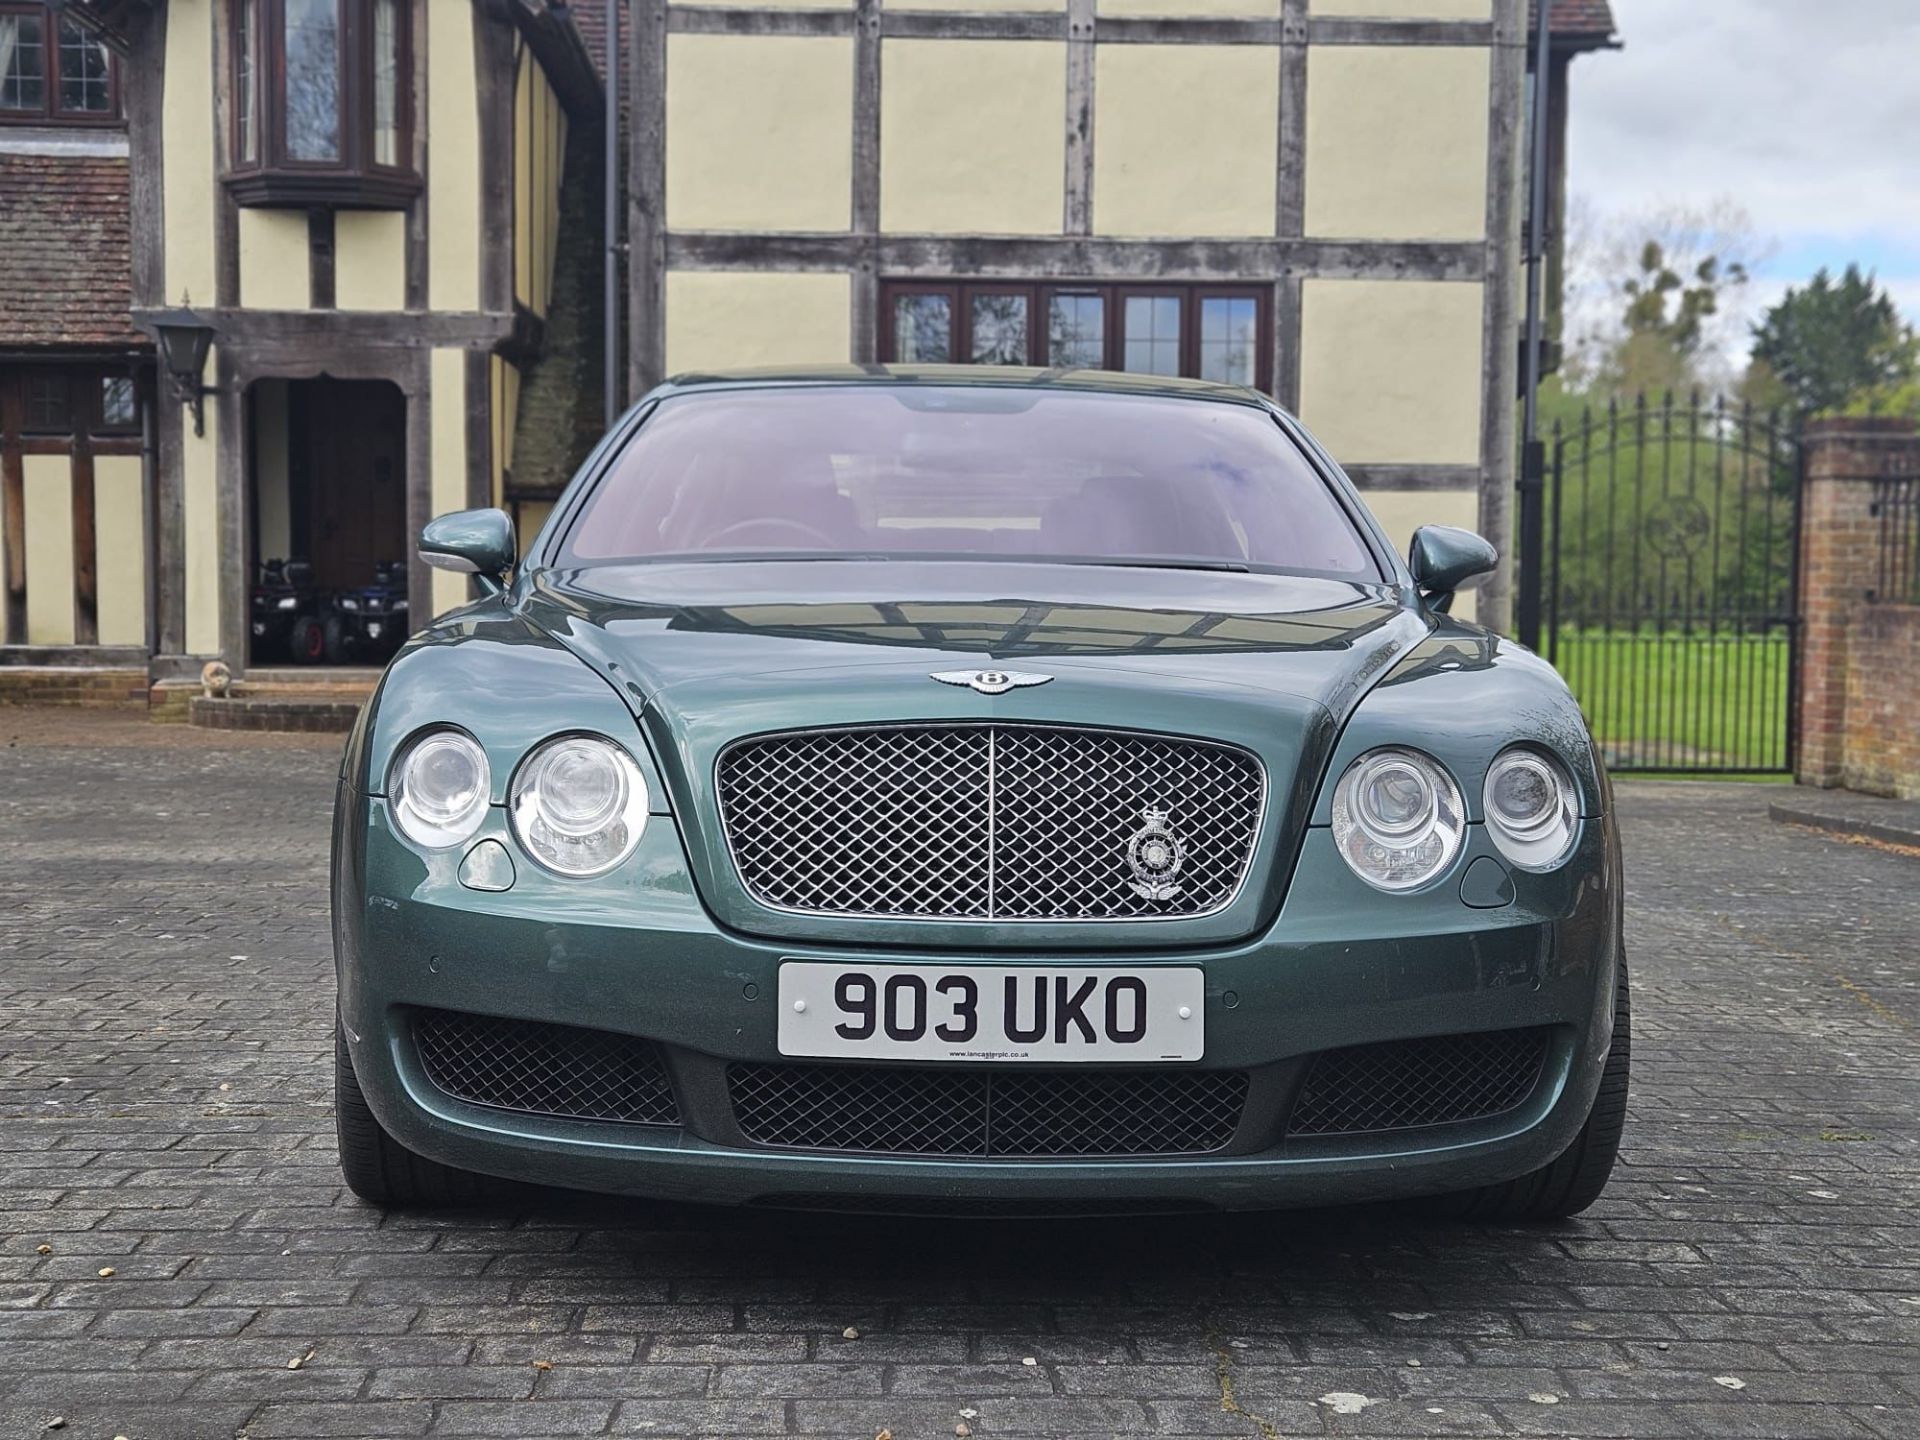 2006 Bentley Flying Spur - ULEZ compliant and only 18,344 miles